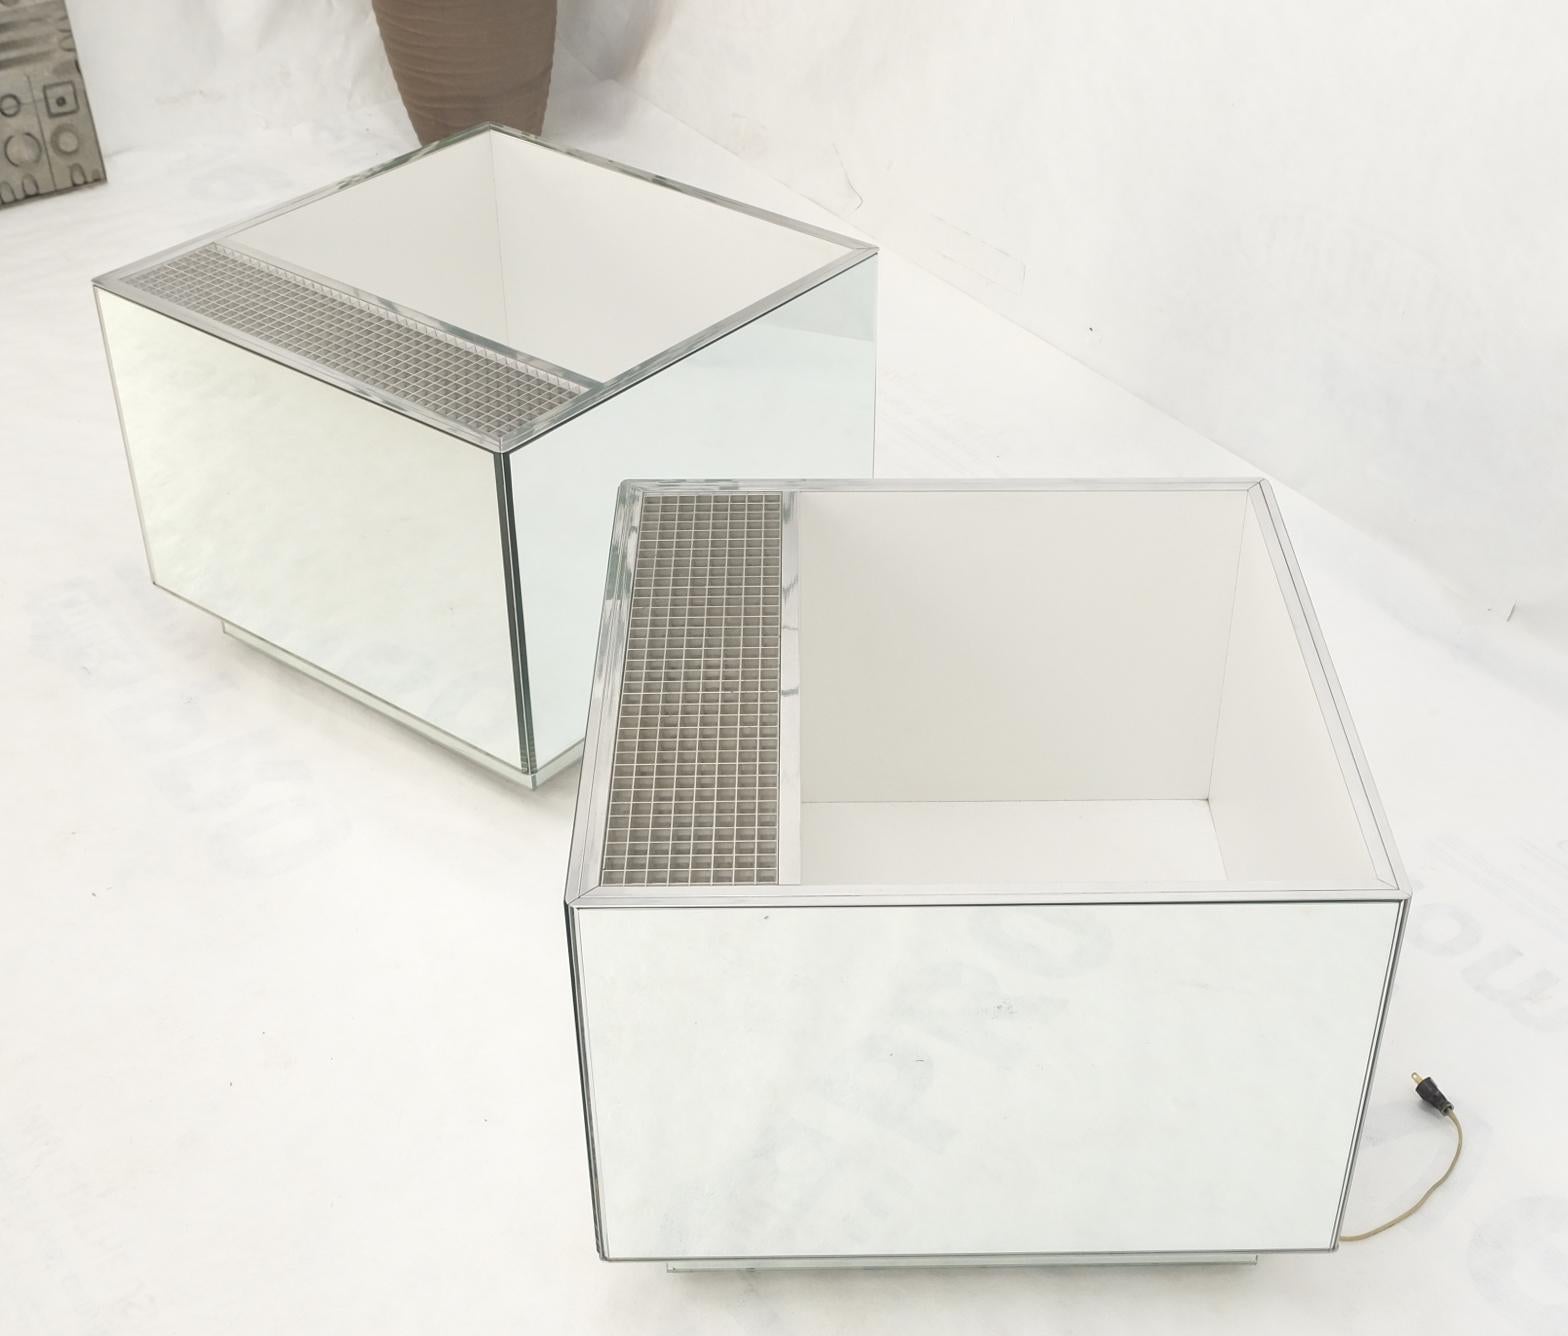 Pair of Very Fine Mirrored Box Planters Lights Stainless Steel Cases For Sale 8